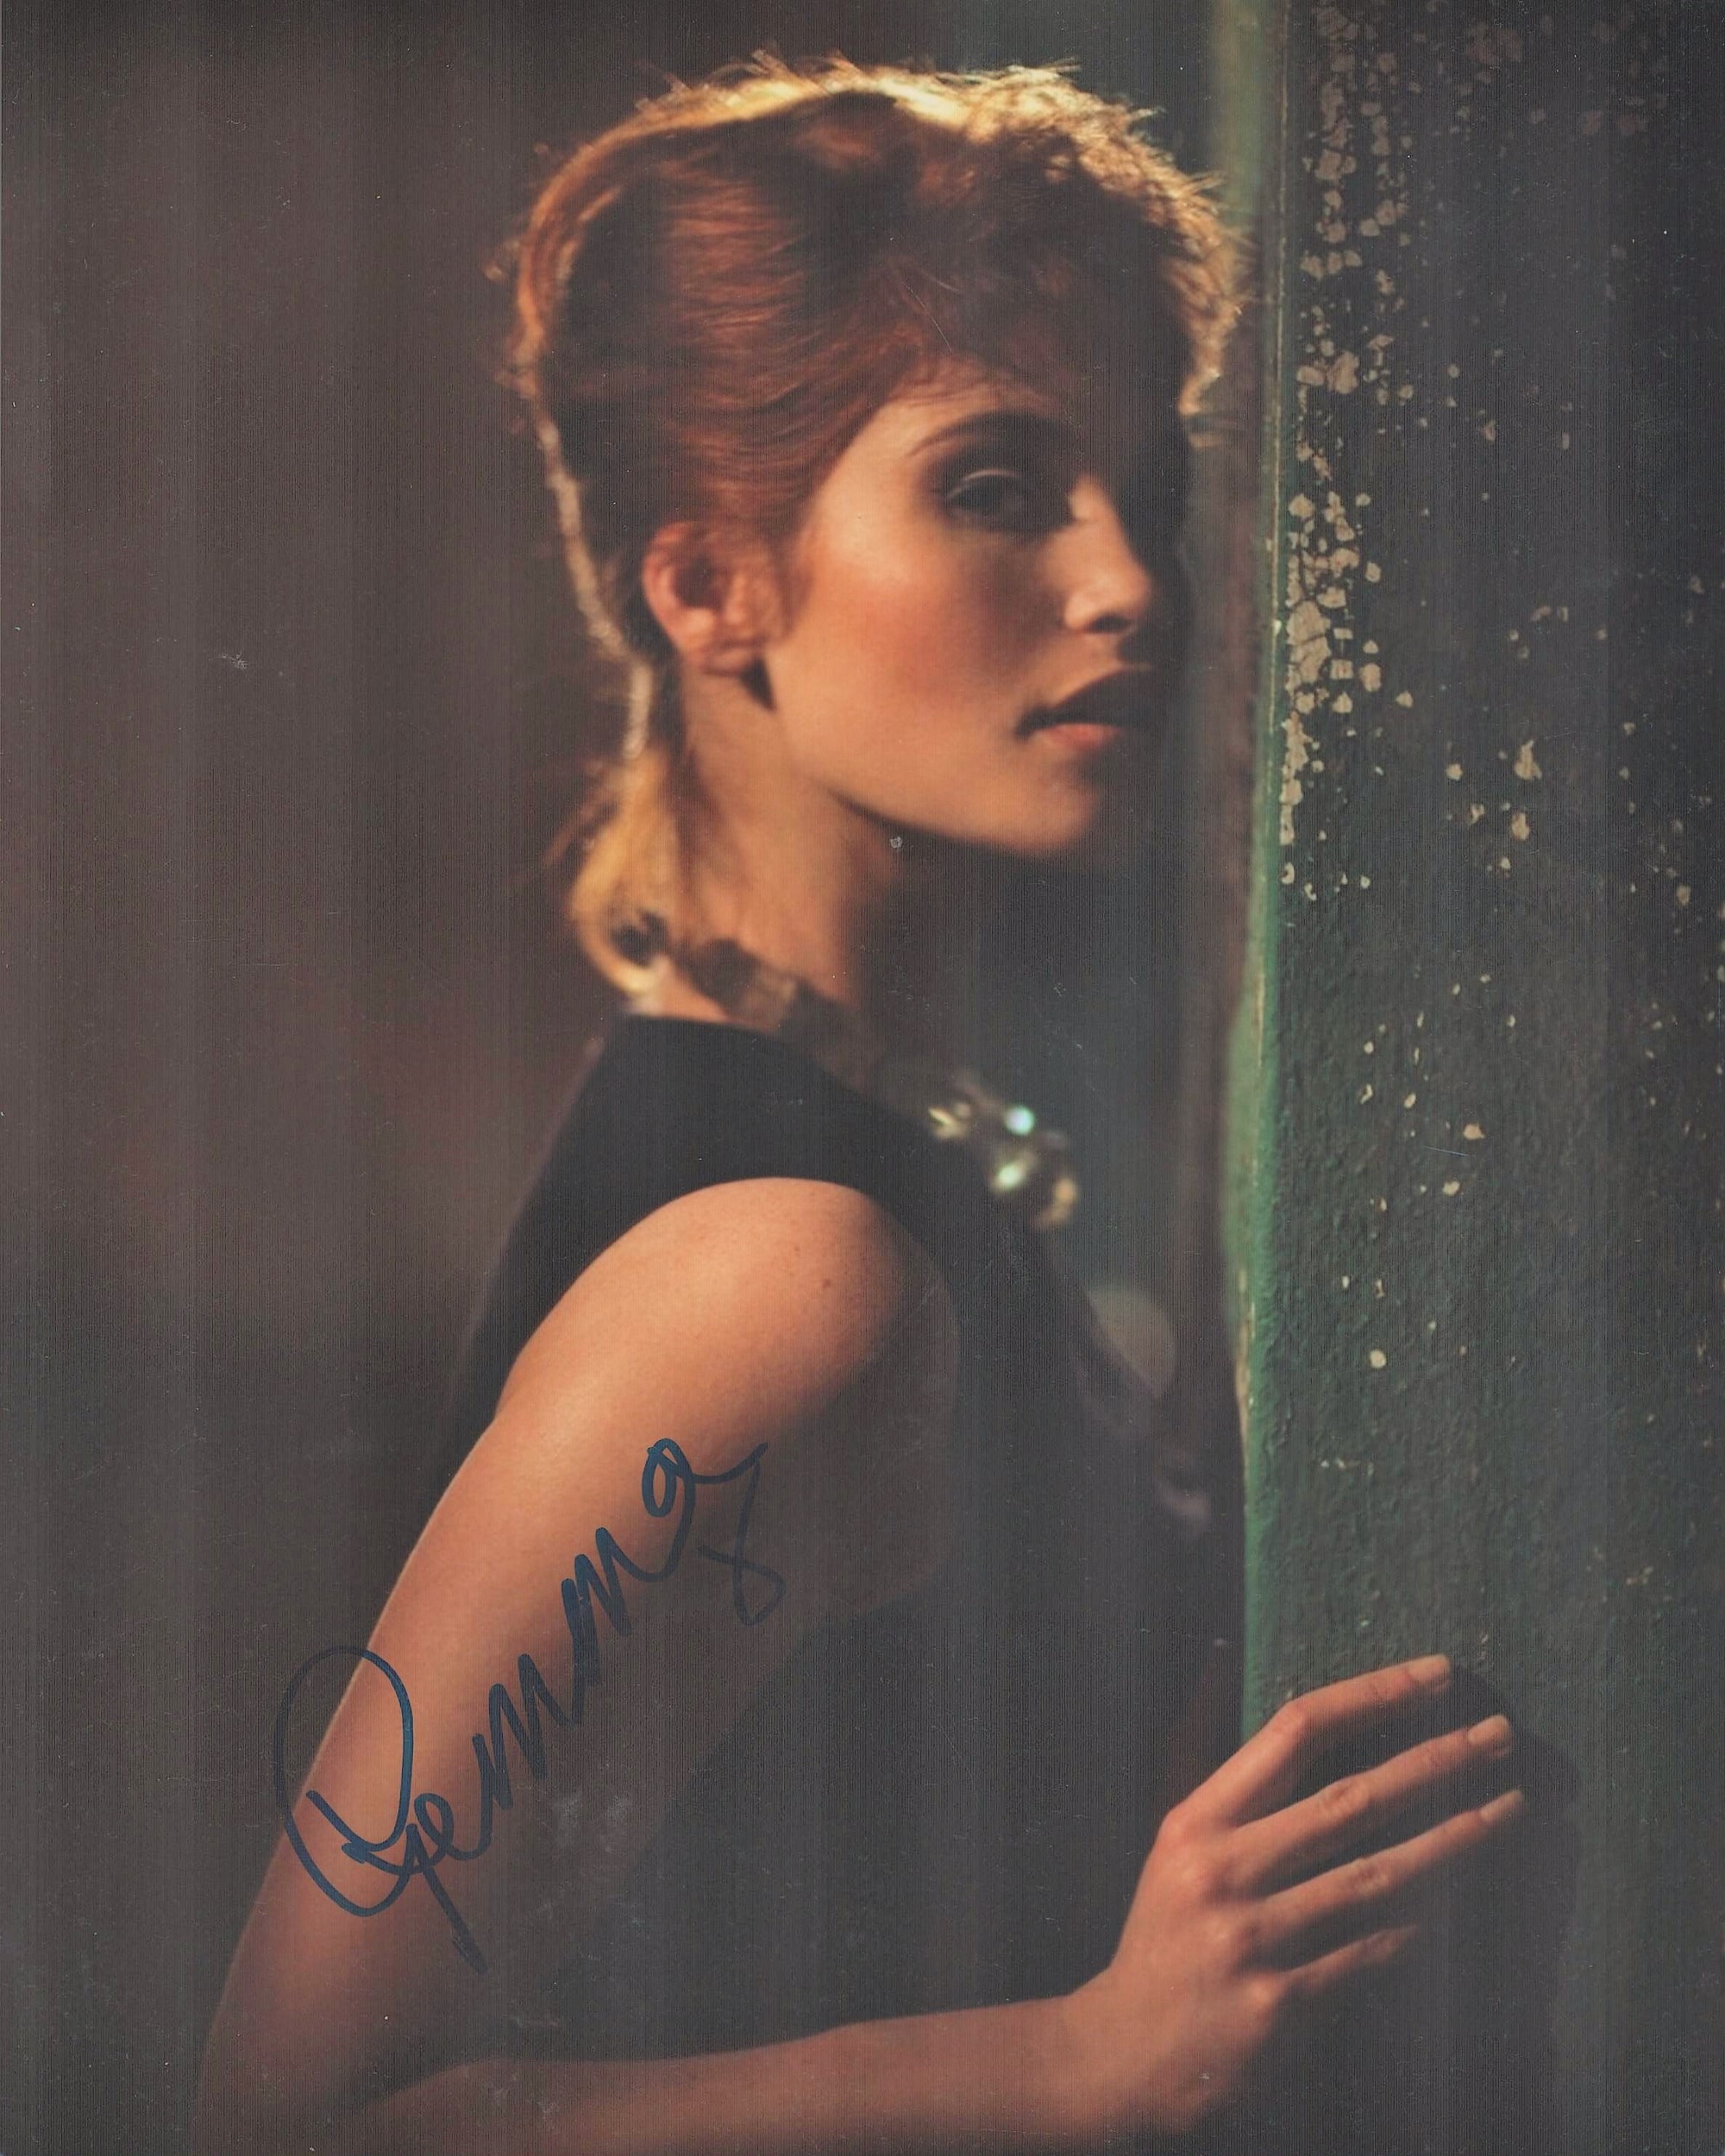 Bond Star, Gemma Arterton signed 10x8 colour photograph pictured during her role as Strawberry